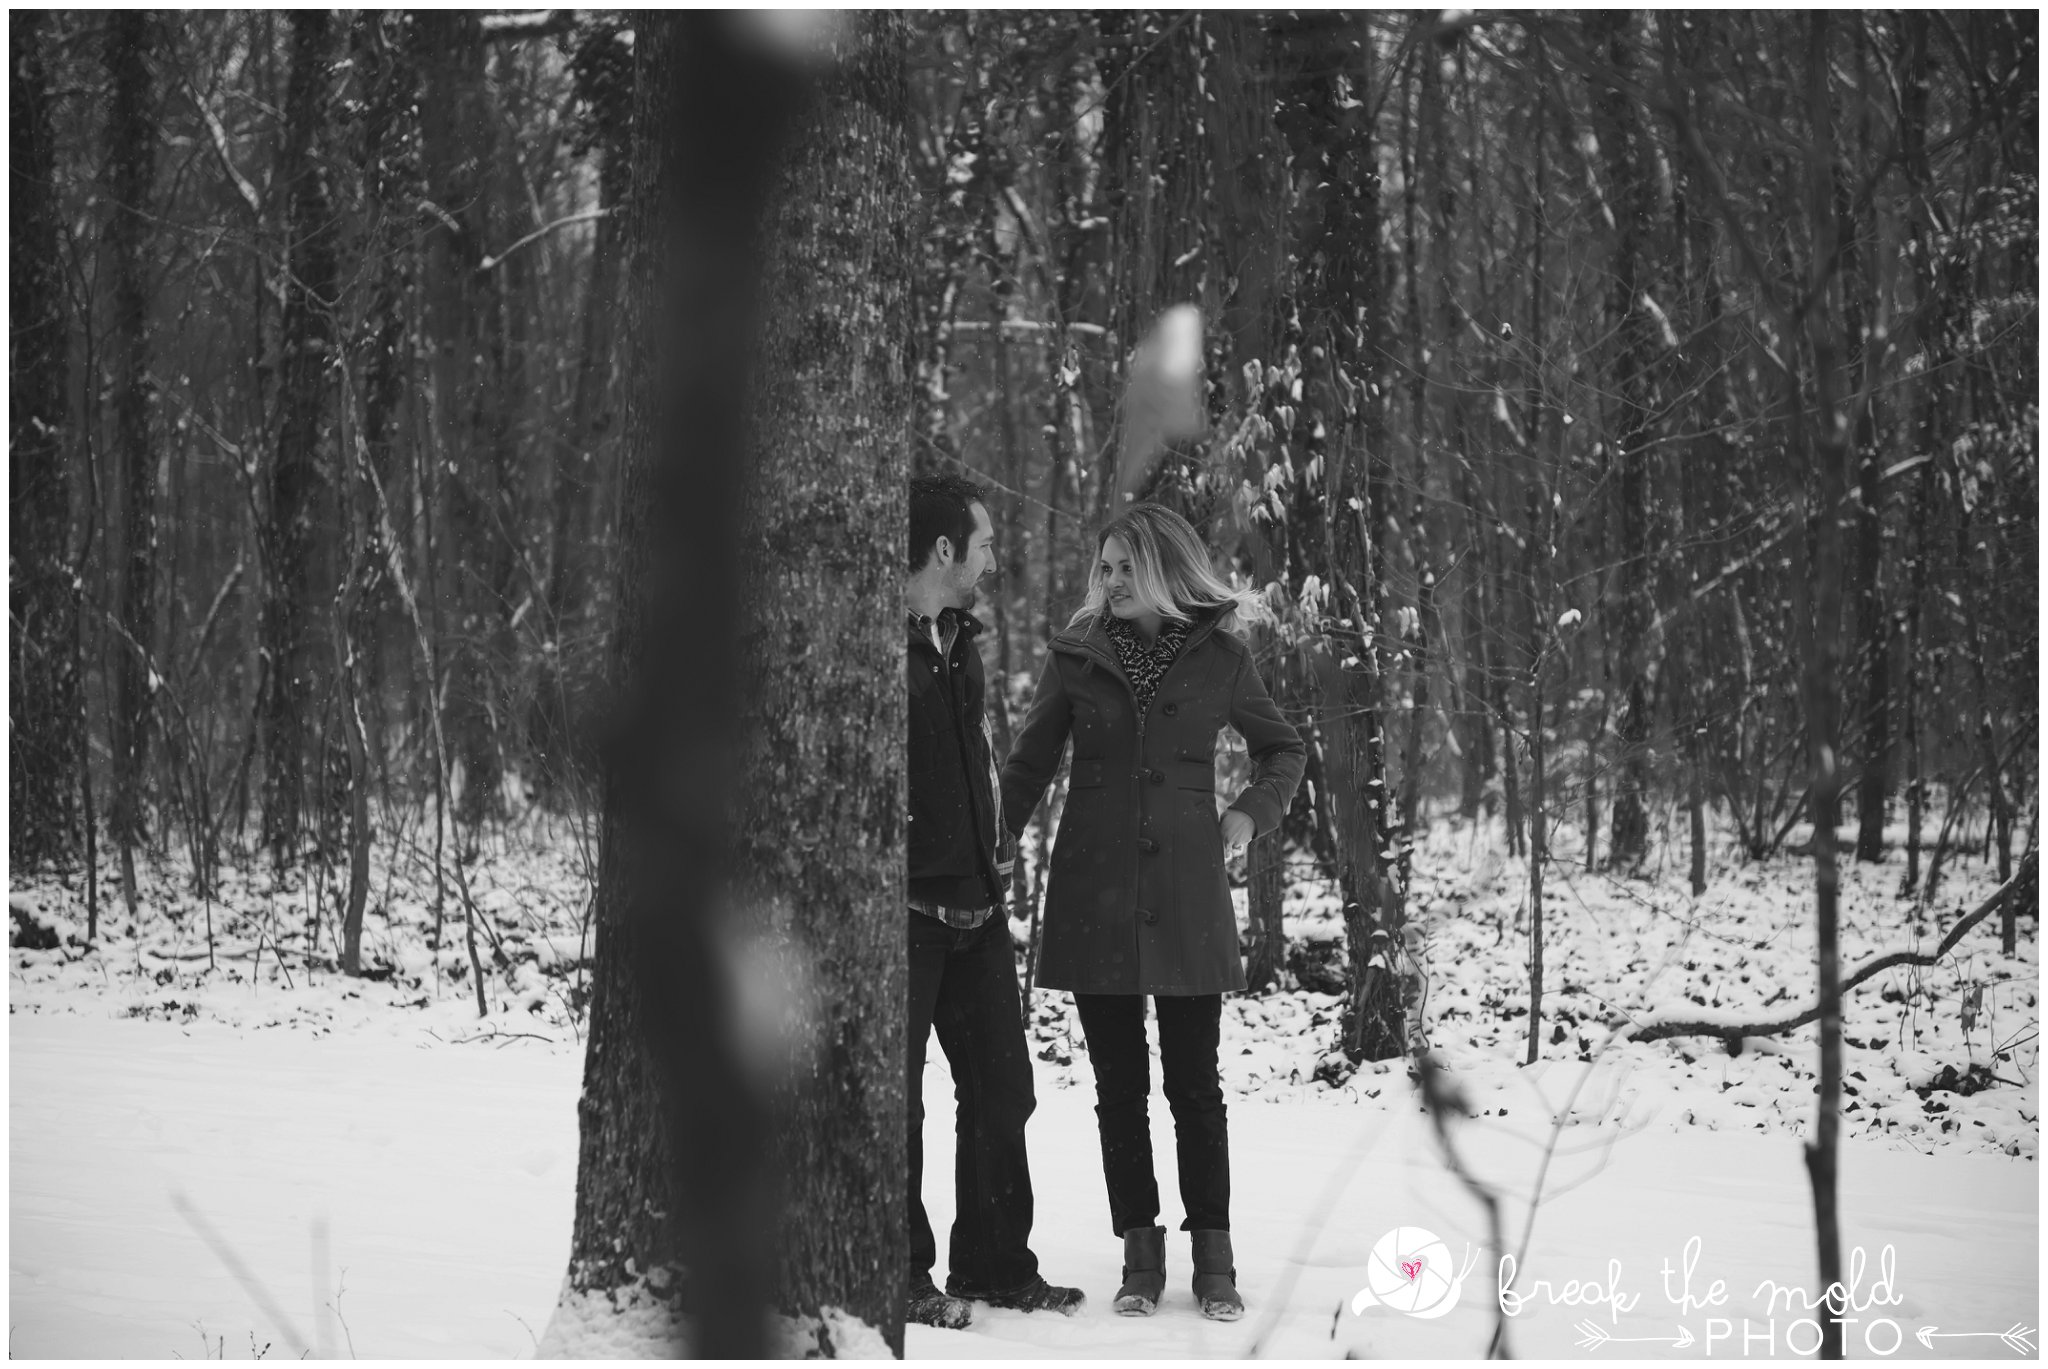 break-the-mold-photo-snowy-day-engagement-photos-knoxville-tn-tennessee-snow-day-pictures-winter-outdoor-unique-family_1496.jpg